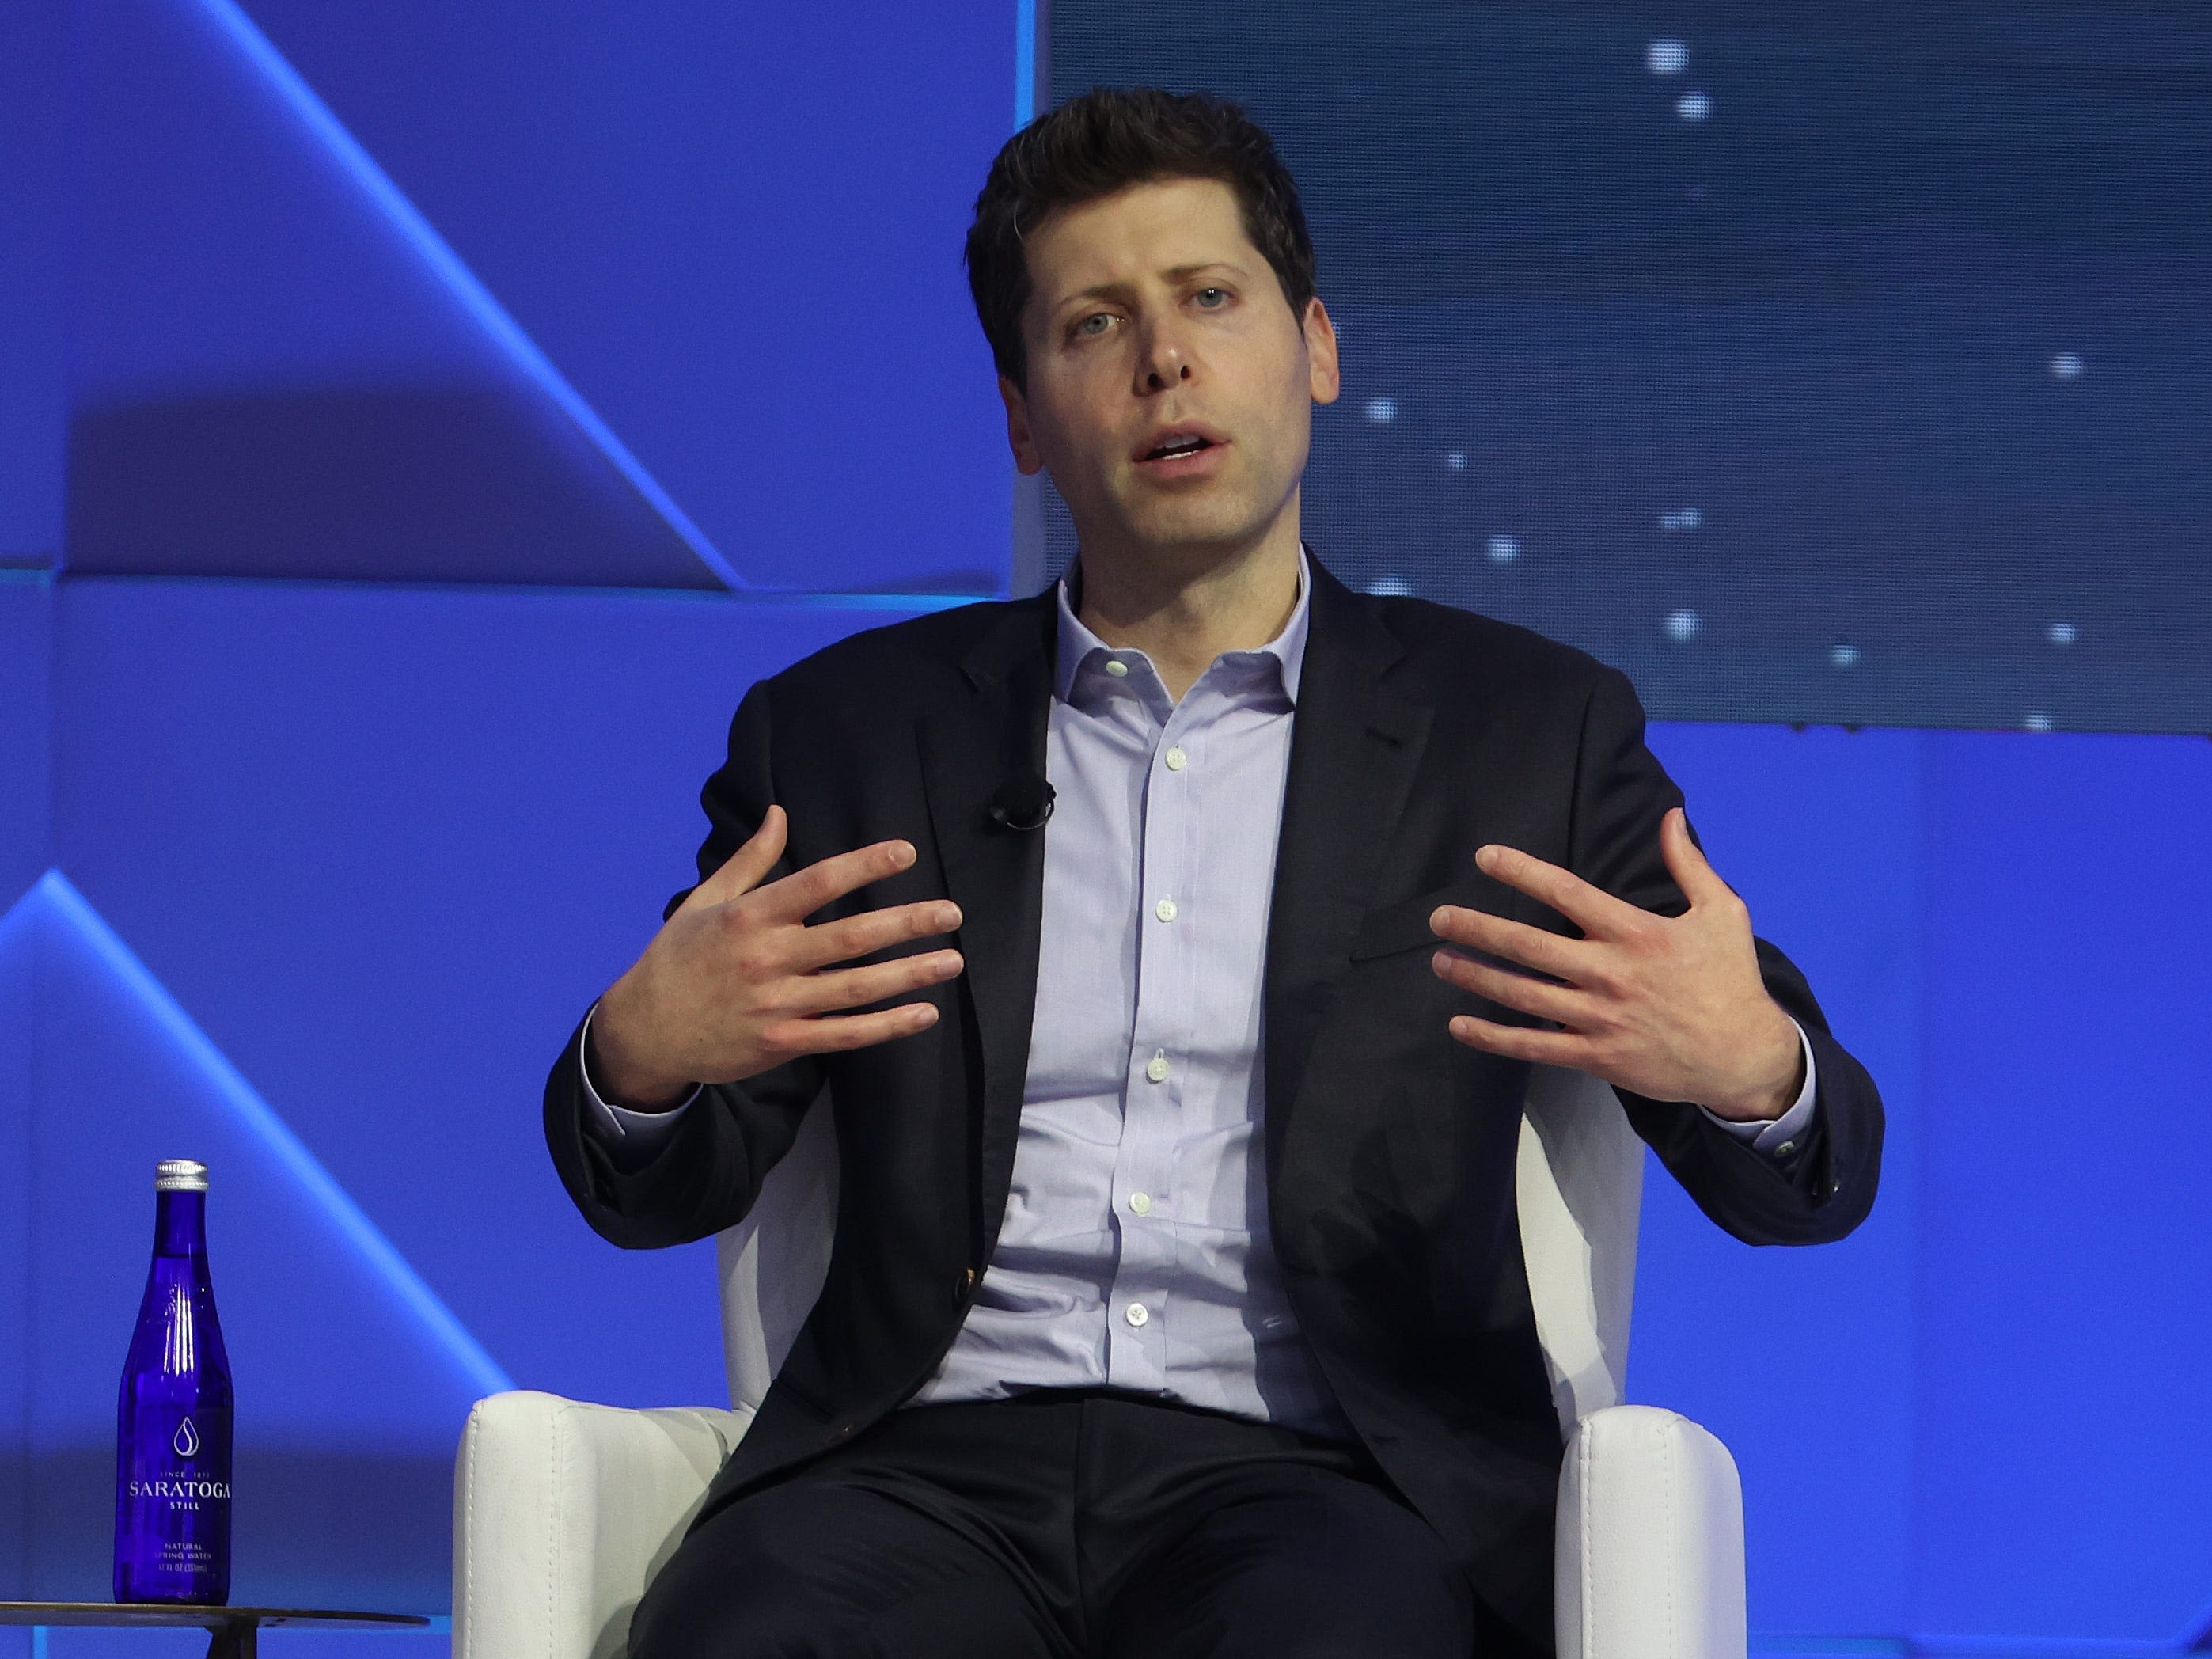 Sam Altman says society may decide we need AI-client privilege similar to confidentiality with lawyers or doctors